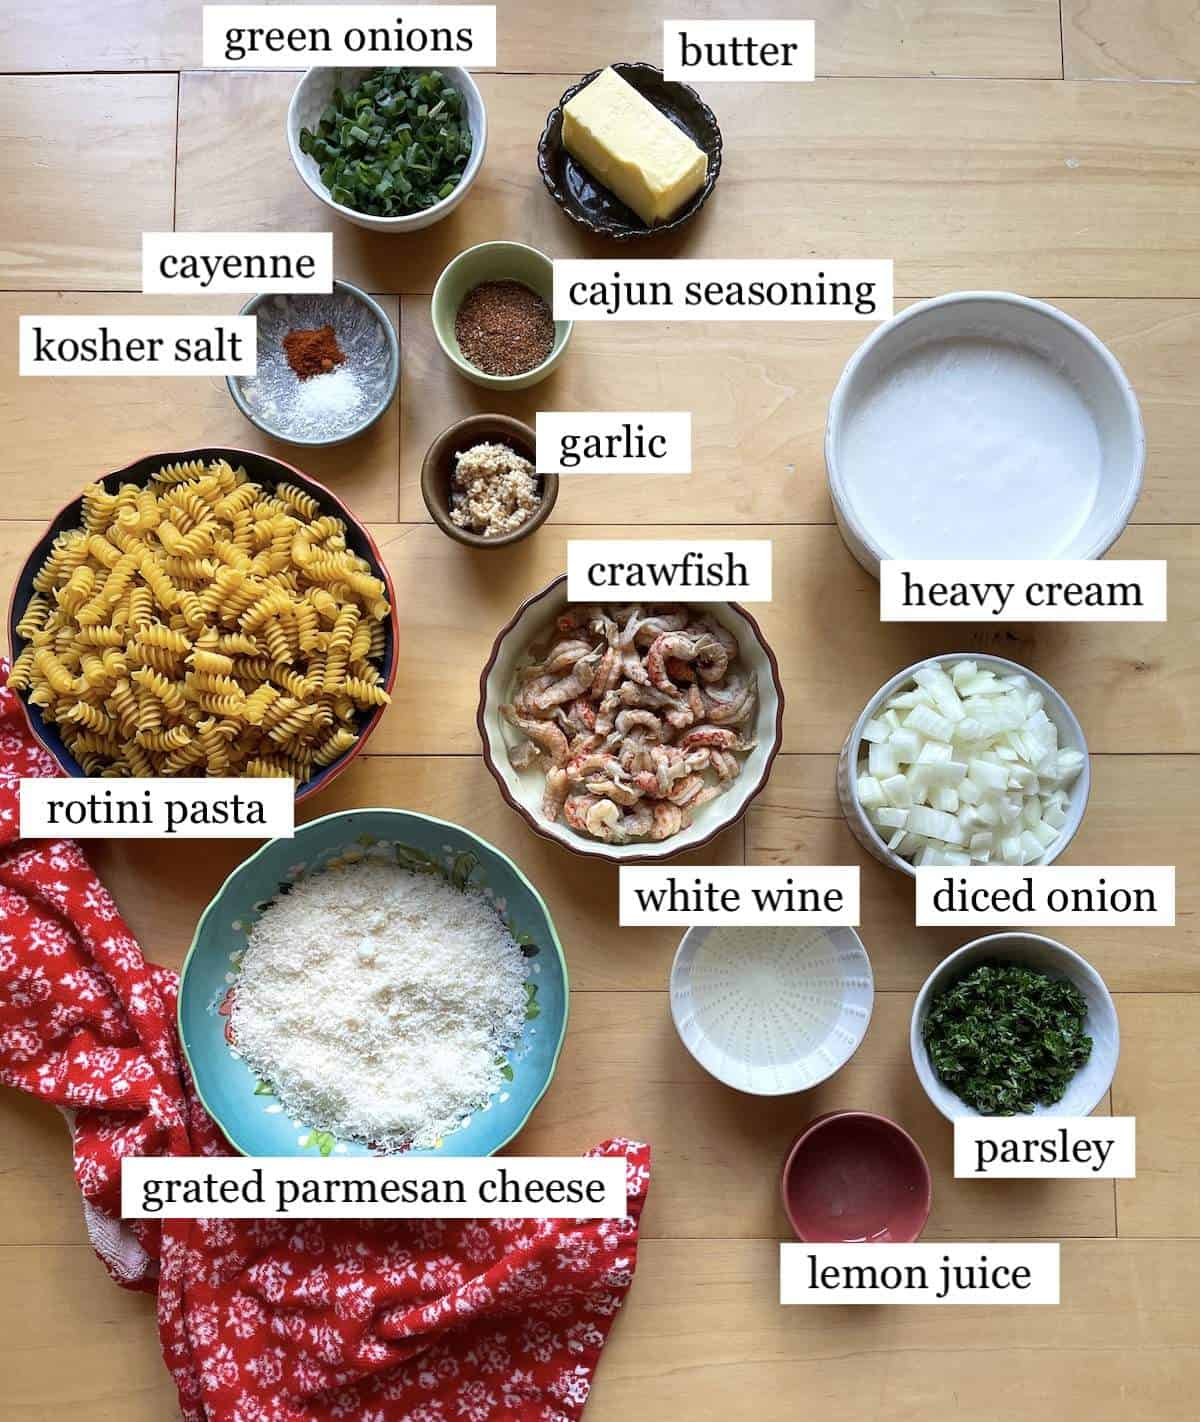 The ingredients in crawfish monica, laid out and labeled.